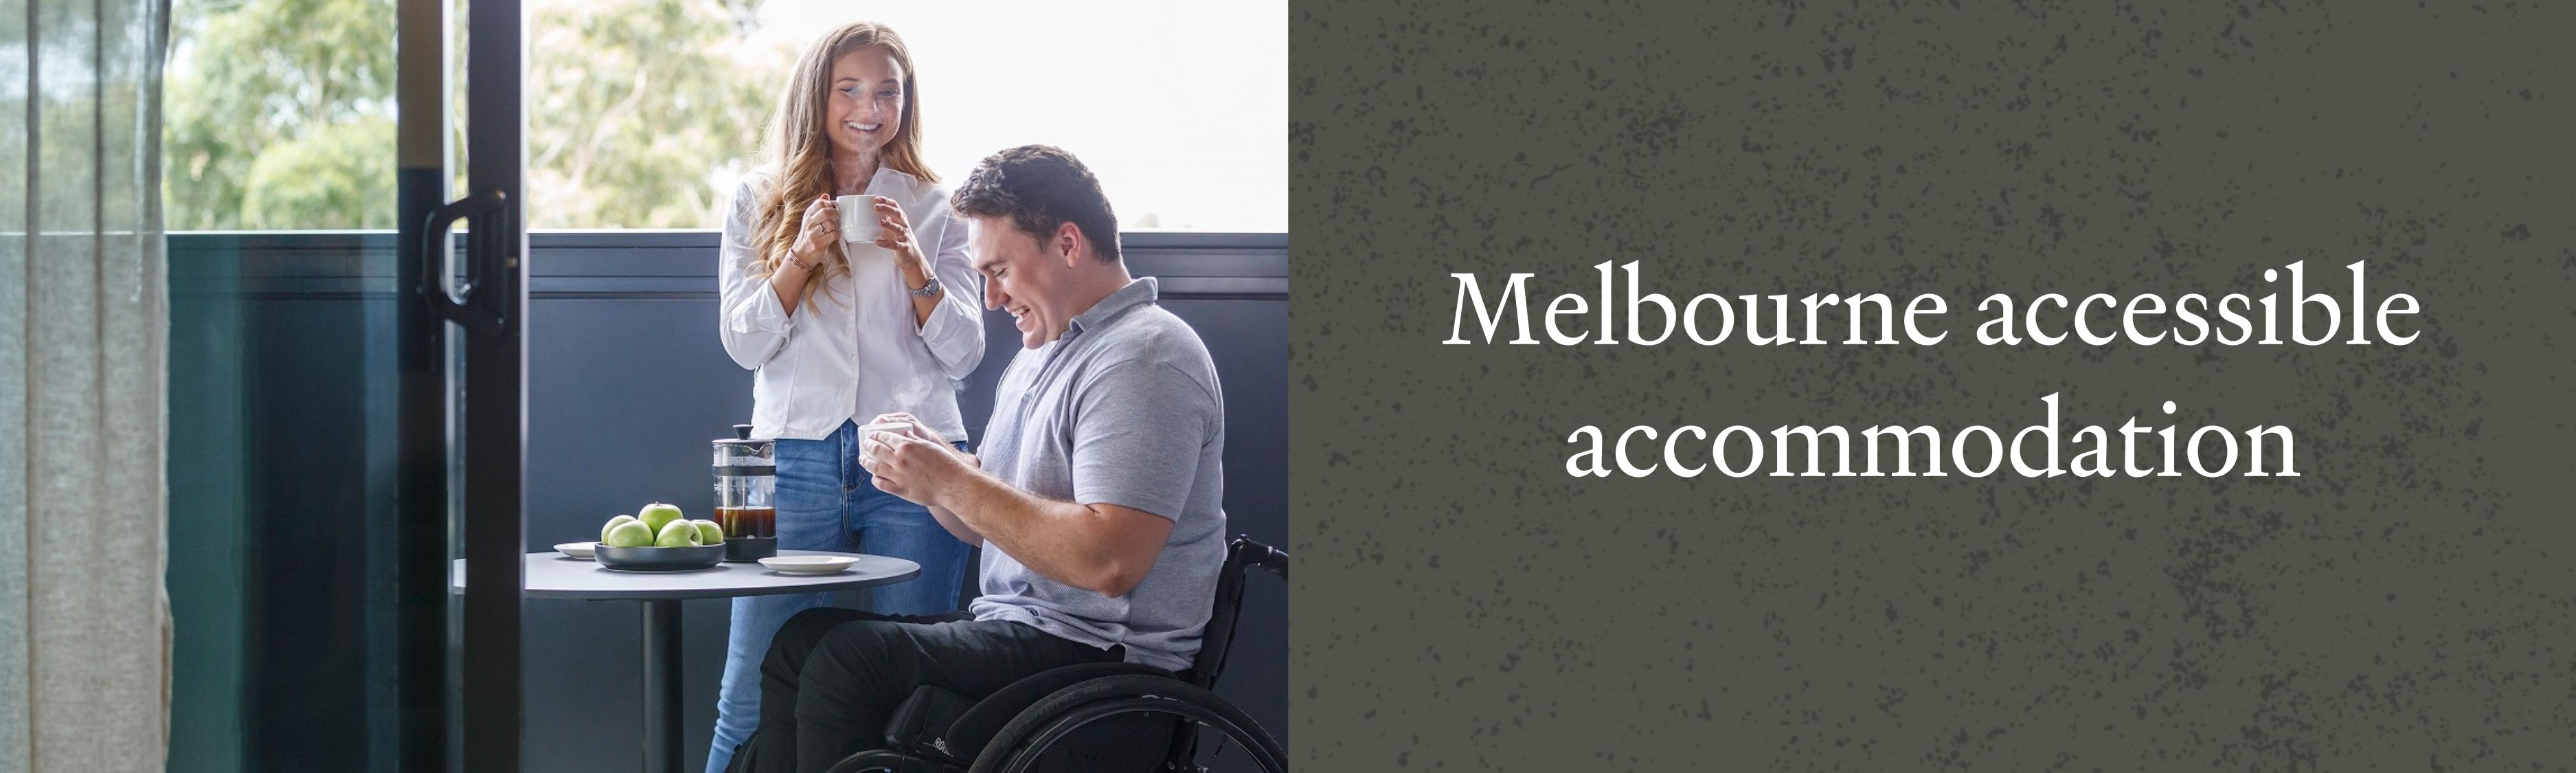 Melbourne Accessible Accommodation - Web Banner